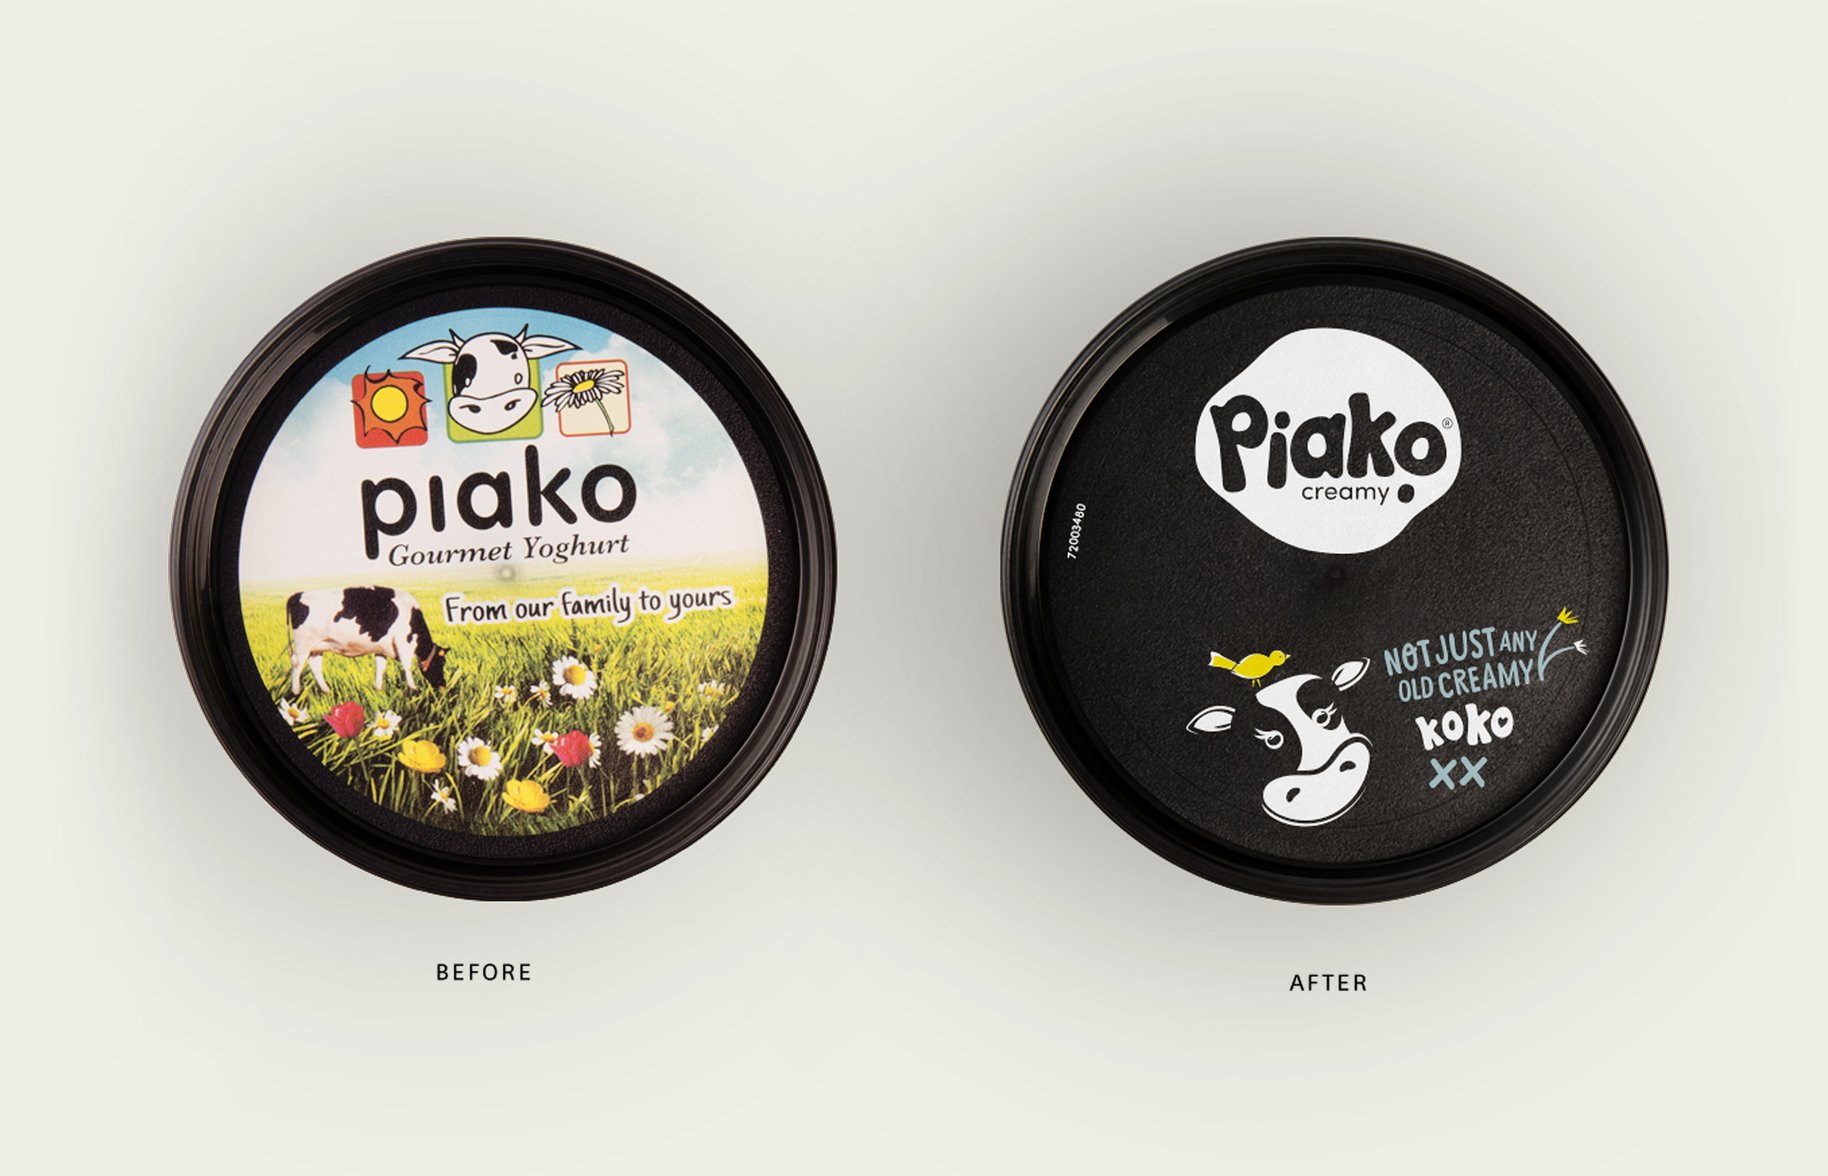 Piako Creamy yoghurt packaging before and after lid